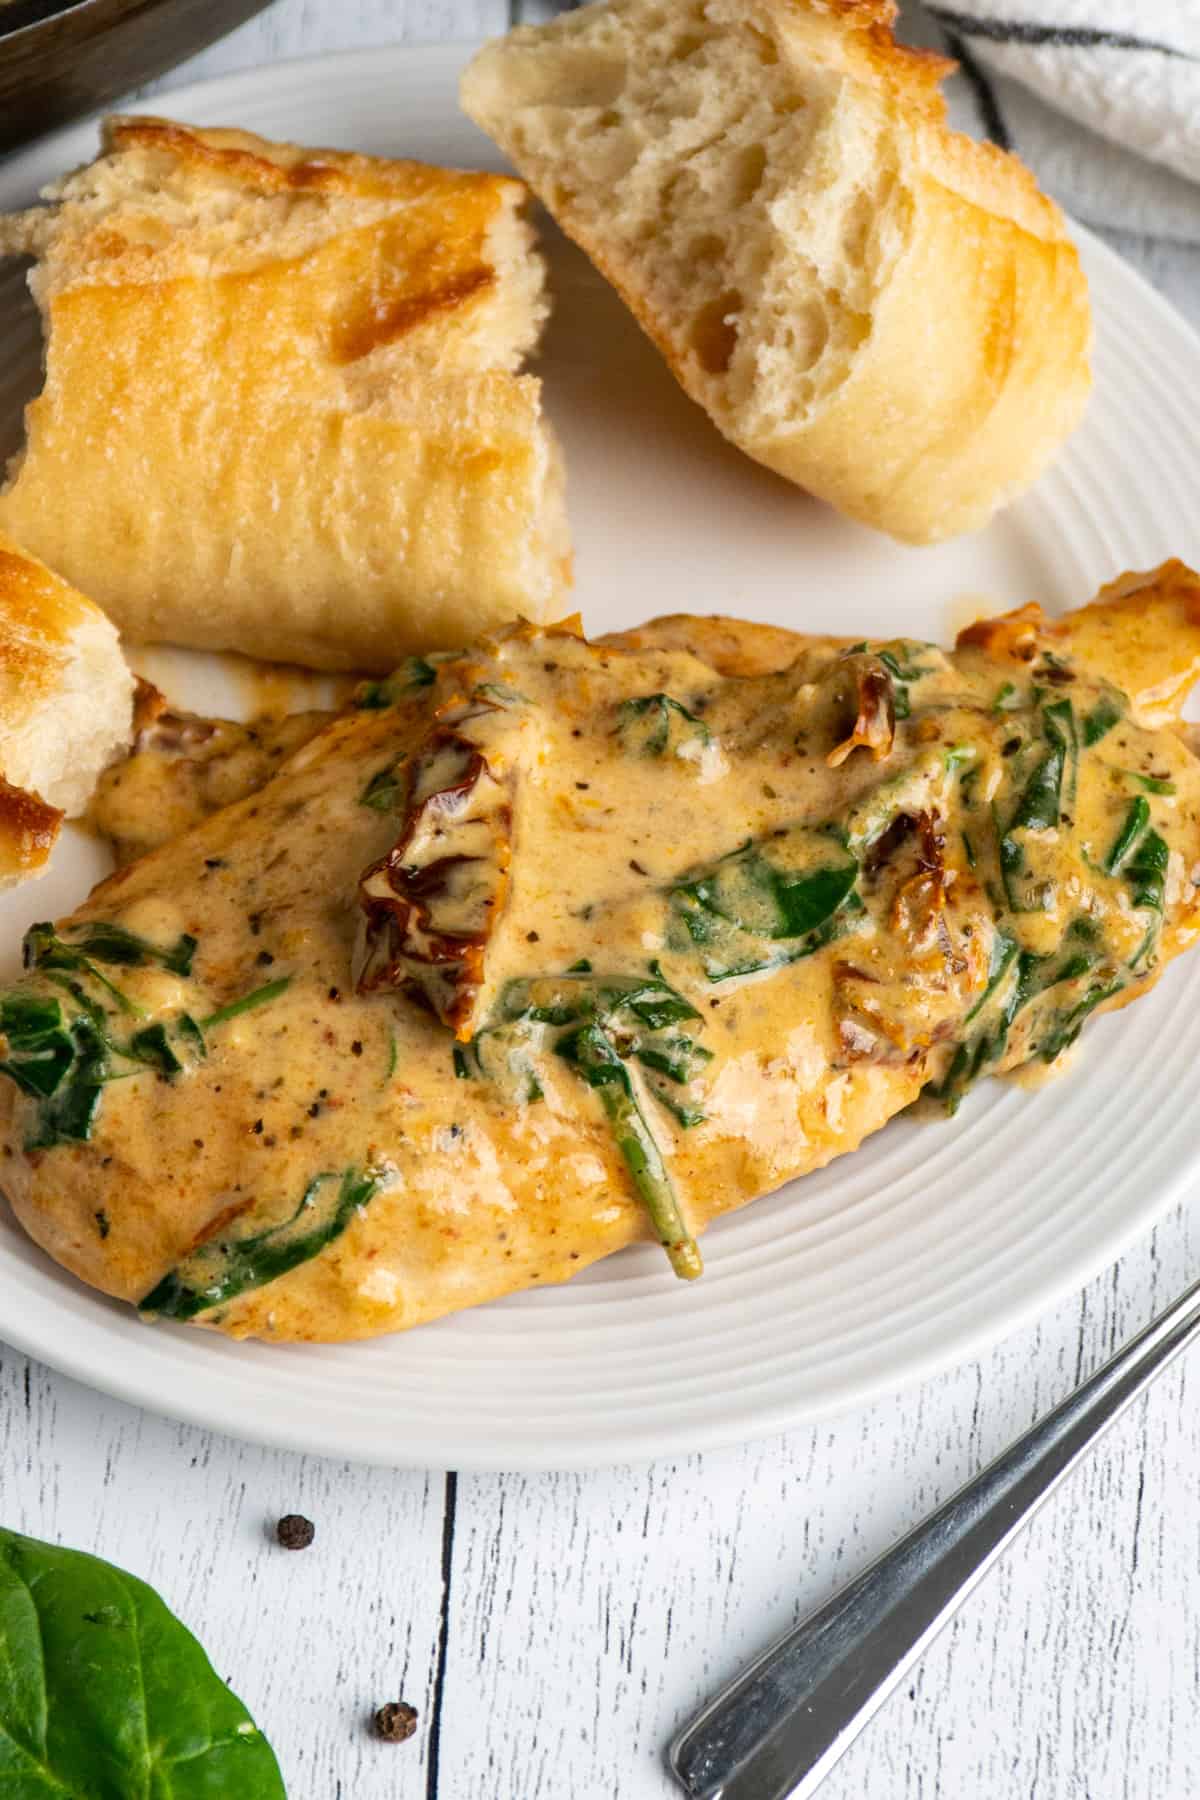 Tuscan chicken on a plate with bread.